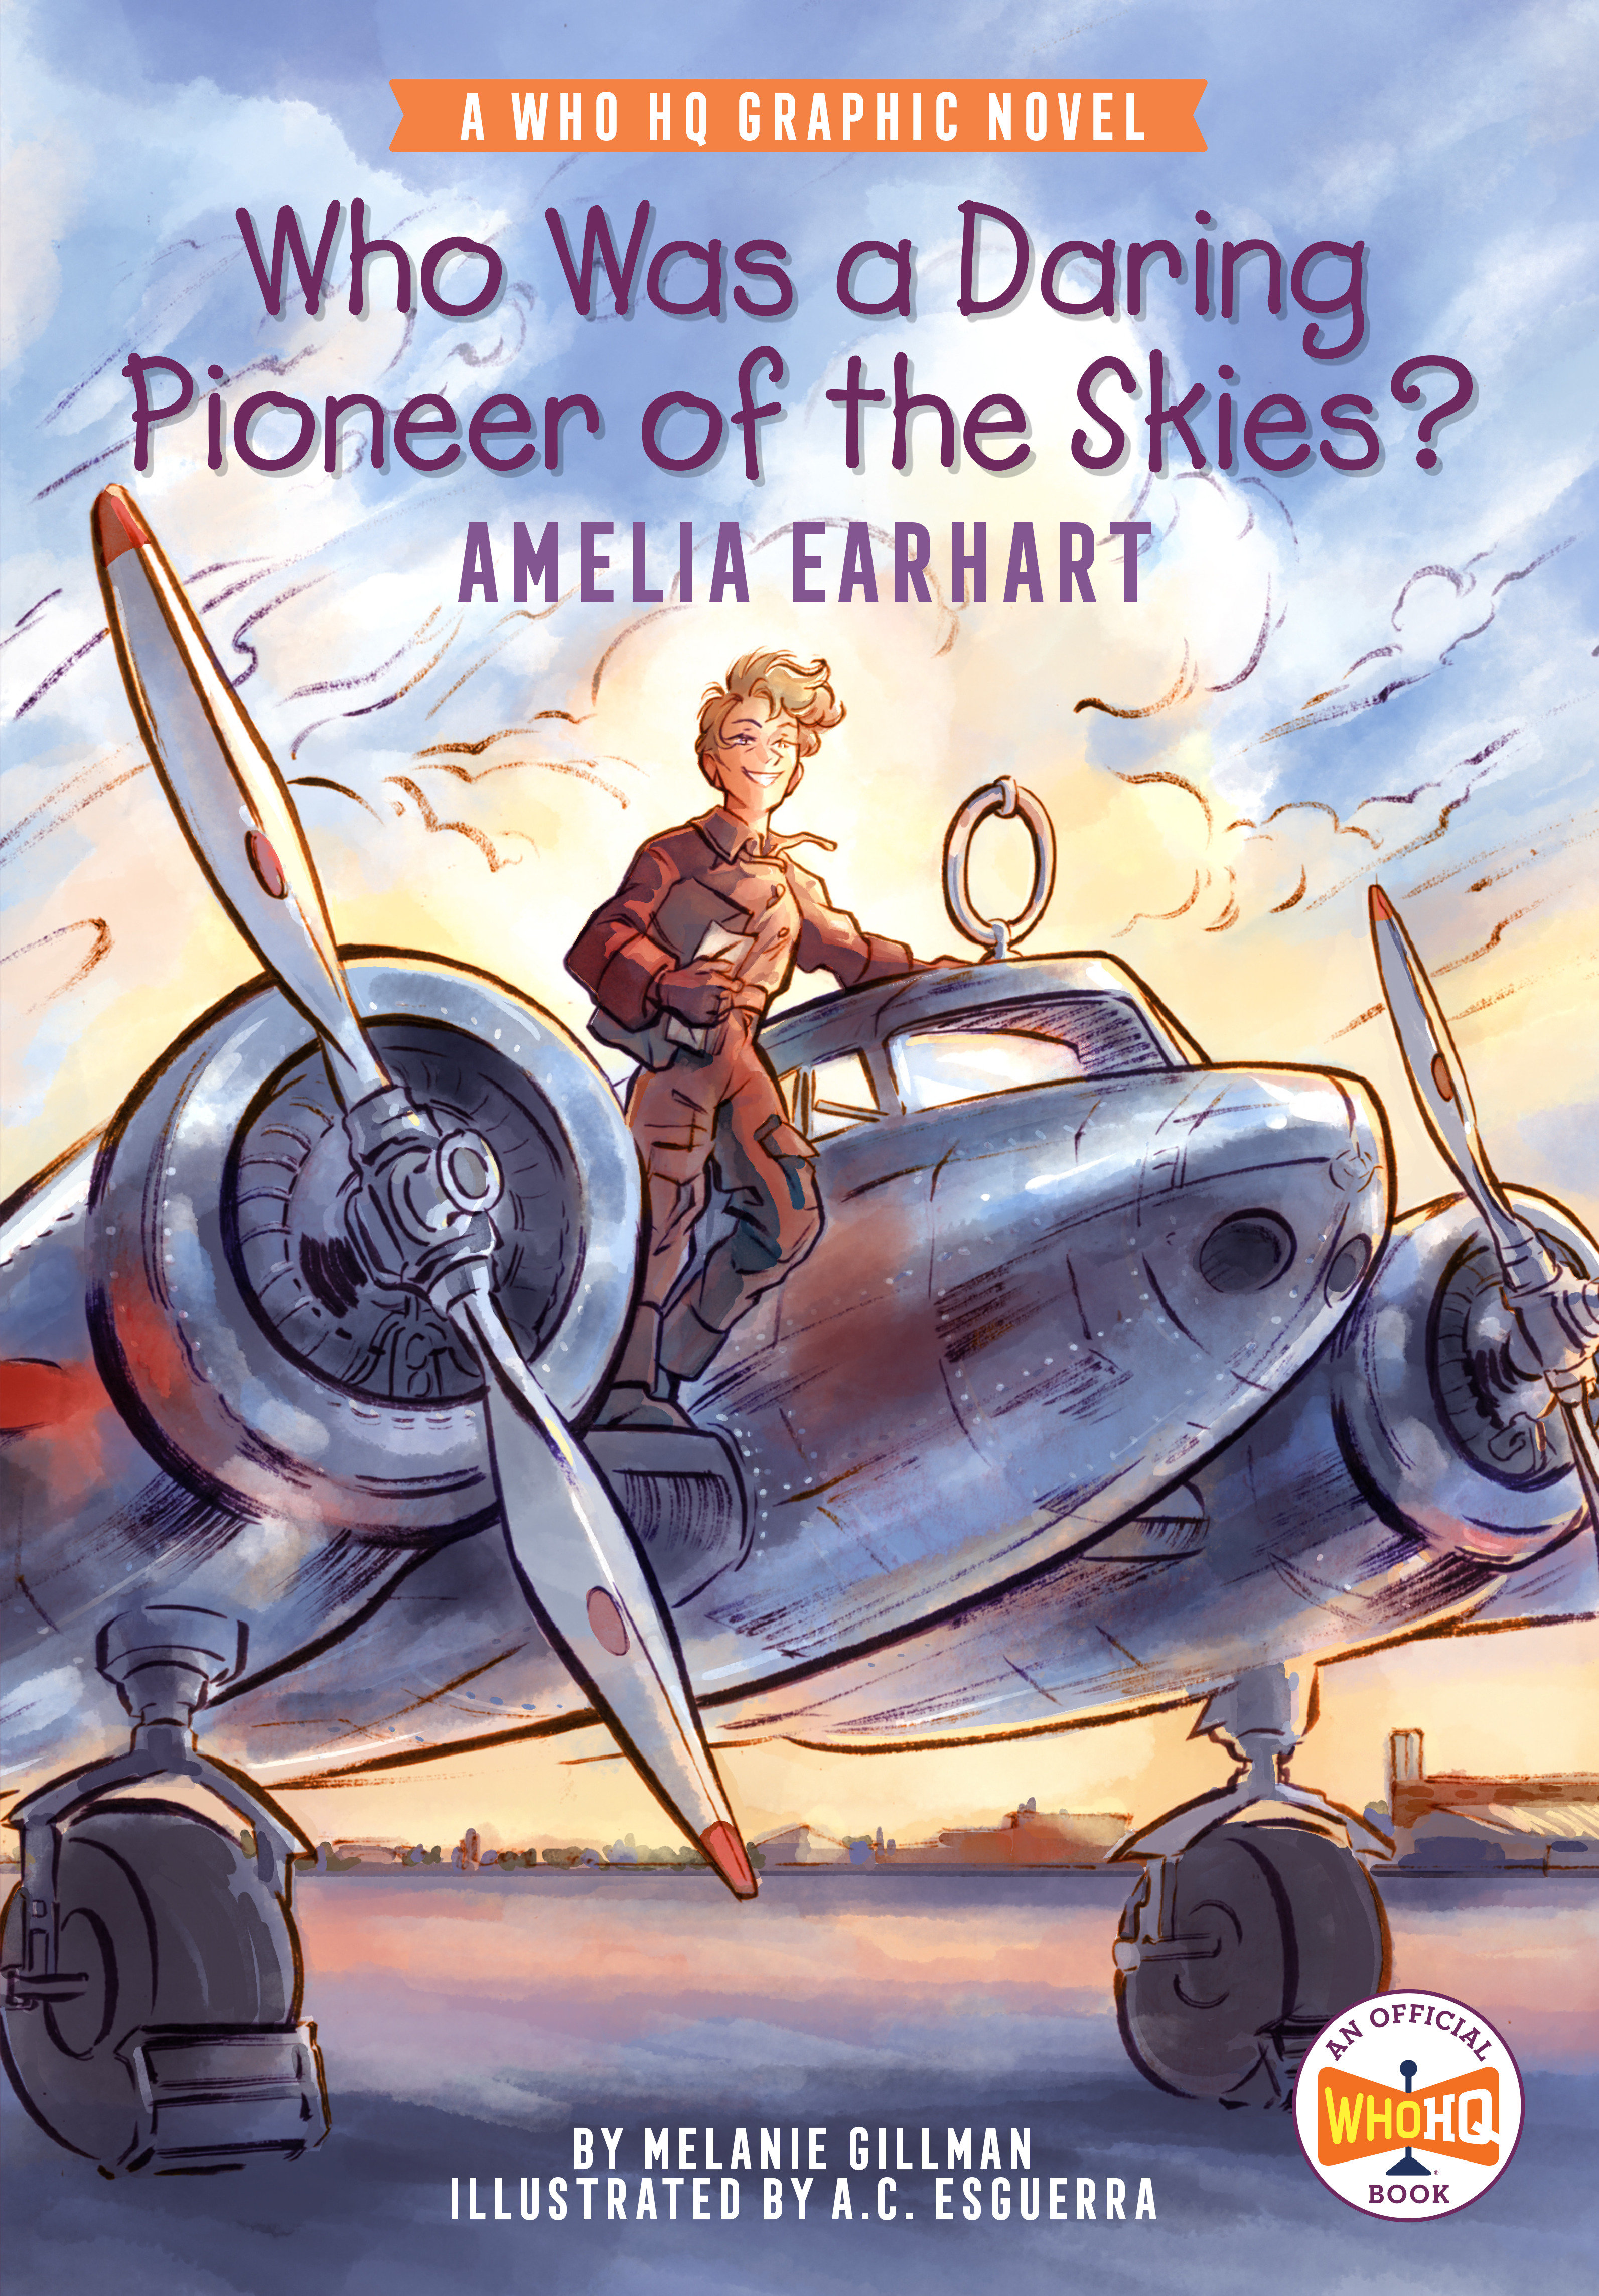 Who HQ Hardcover Volume 2 Who Was A Daring Pioneer of the Skies? Amelia Earhart